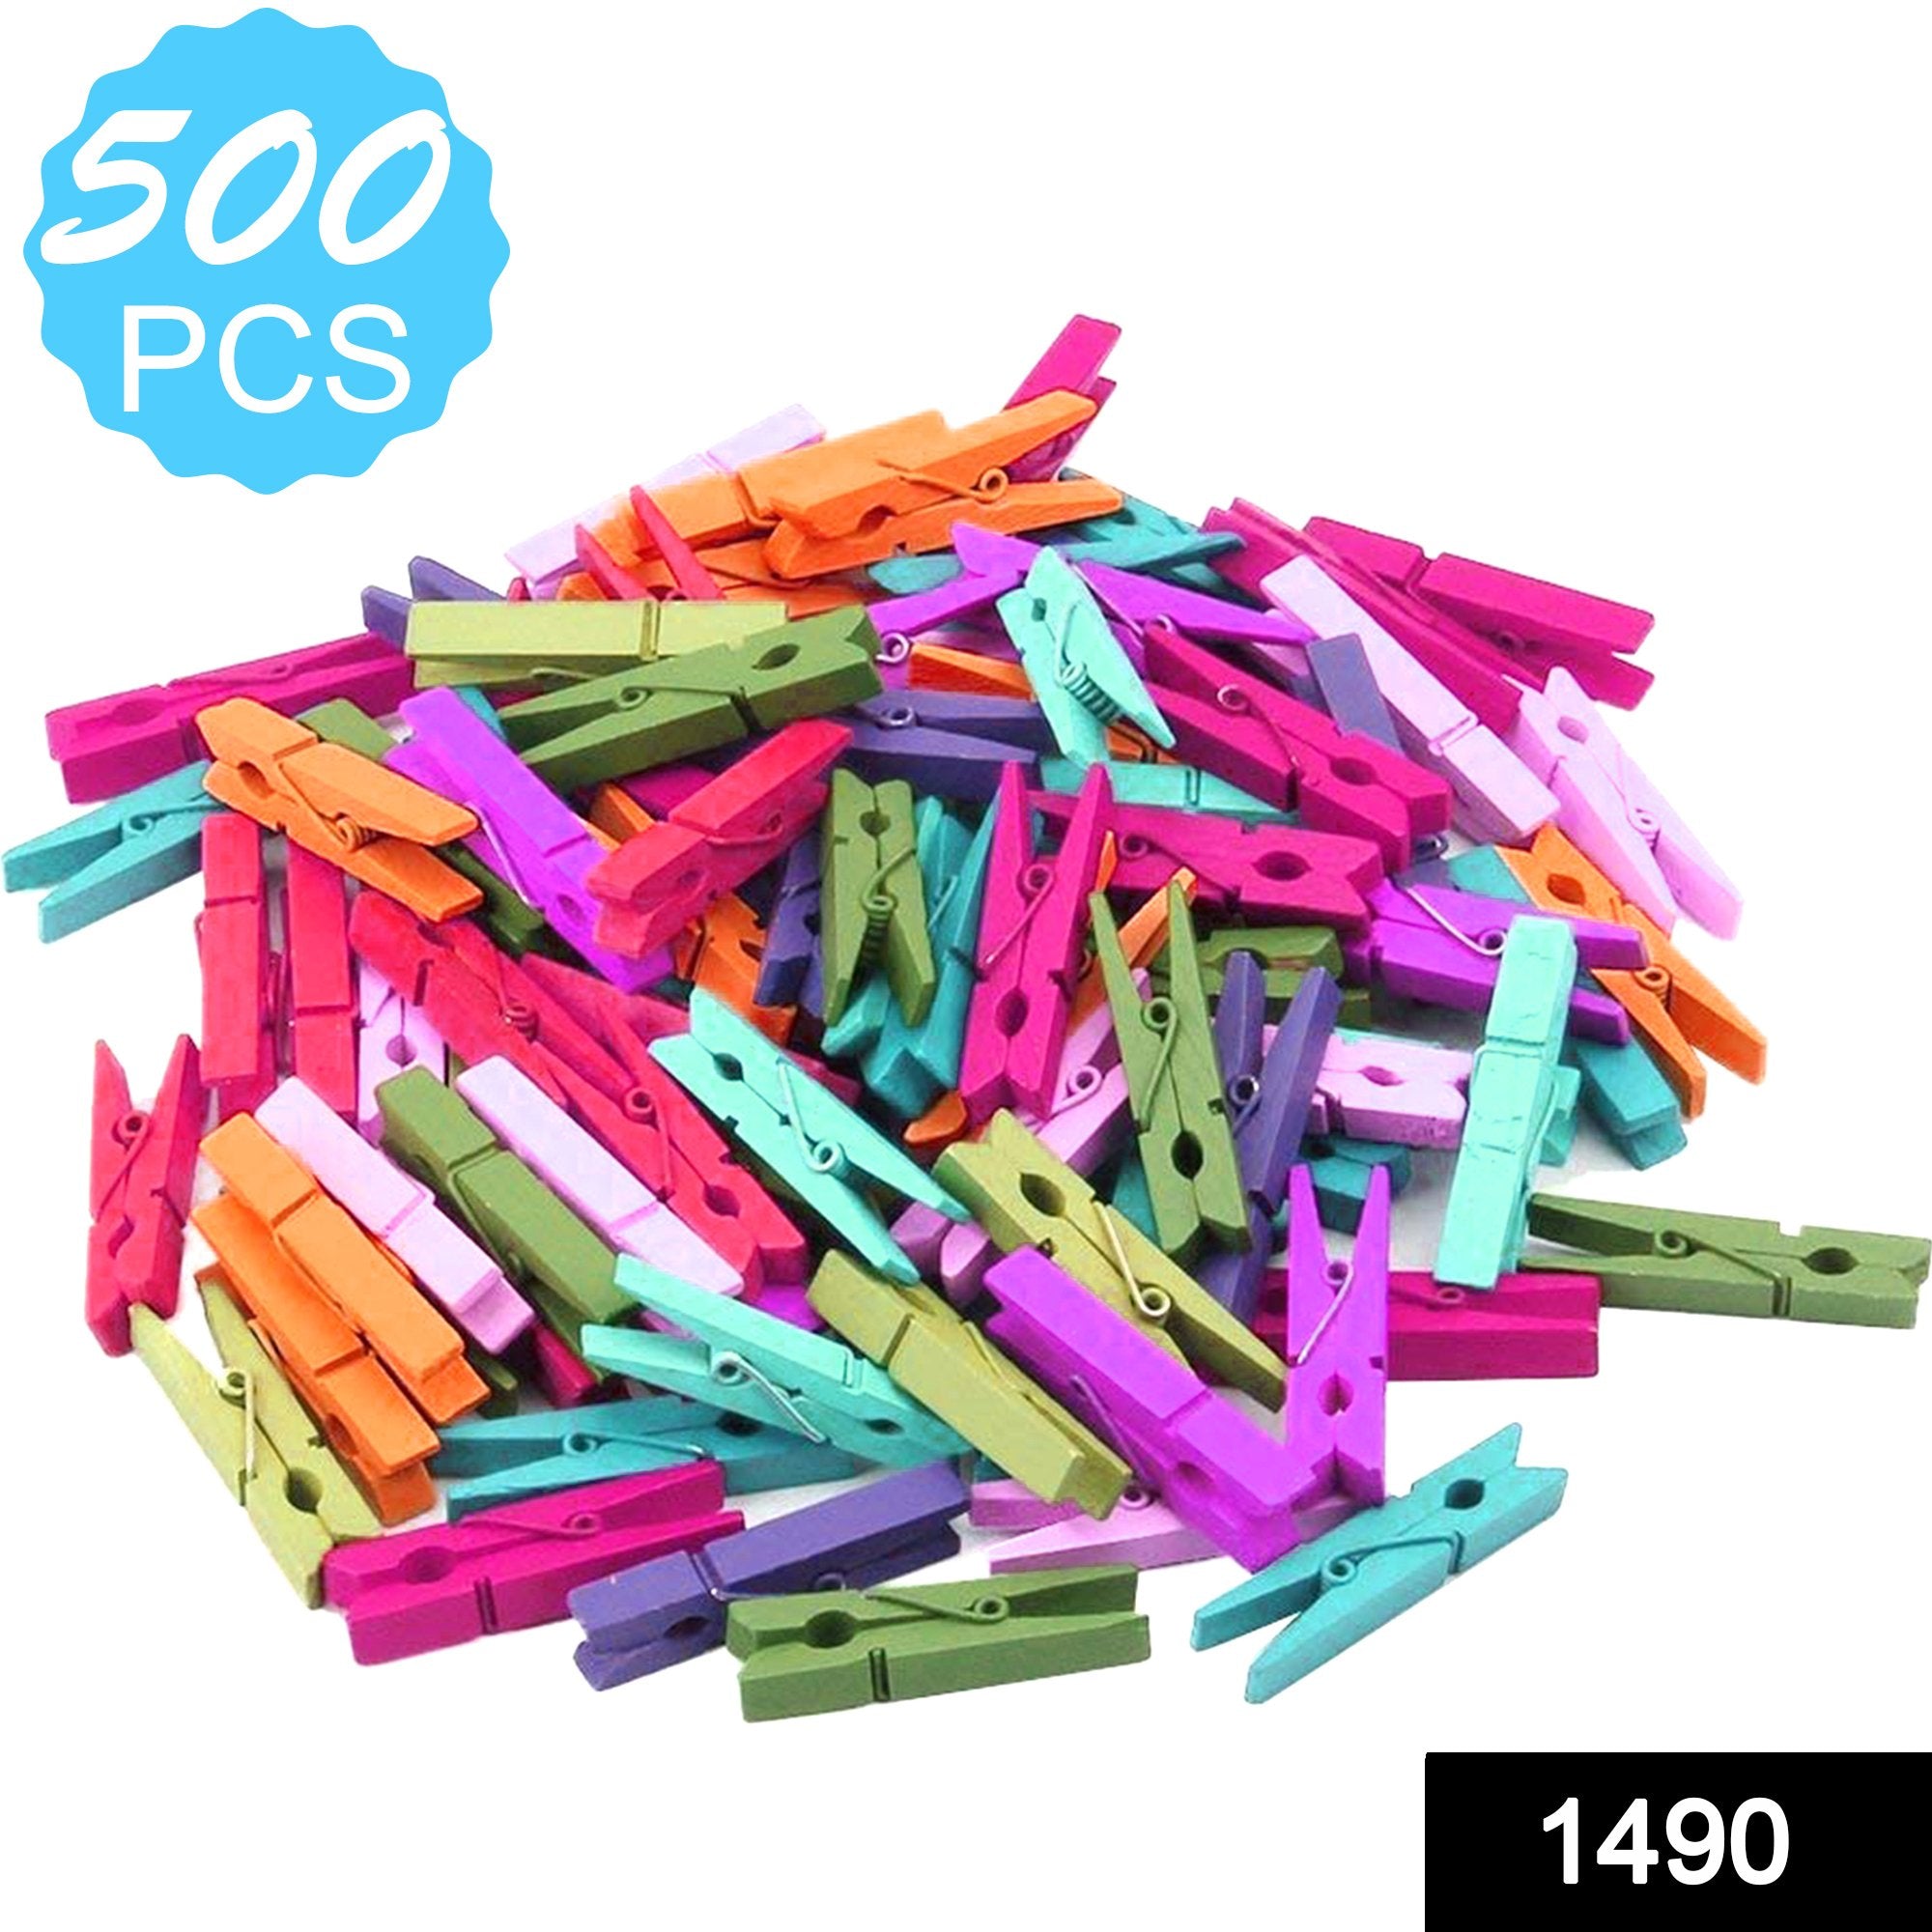 1490 Multipurpose Wooden Clips /Cloth Pegs (Large, 500 Pcs) - SkyShopy